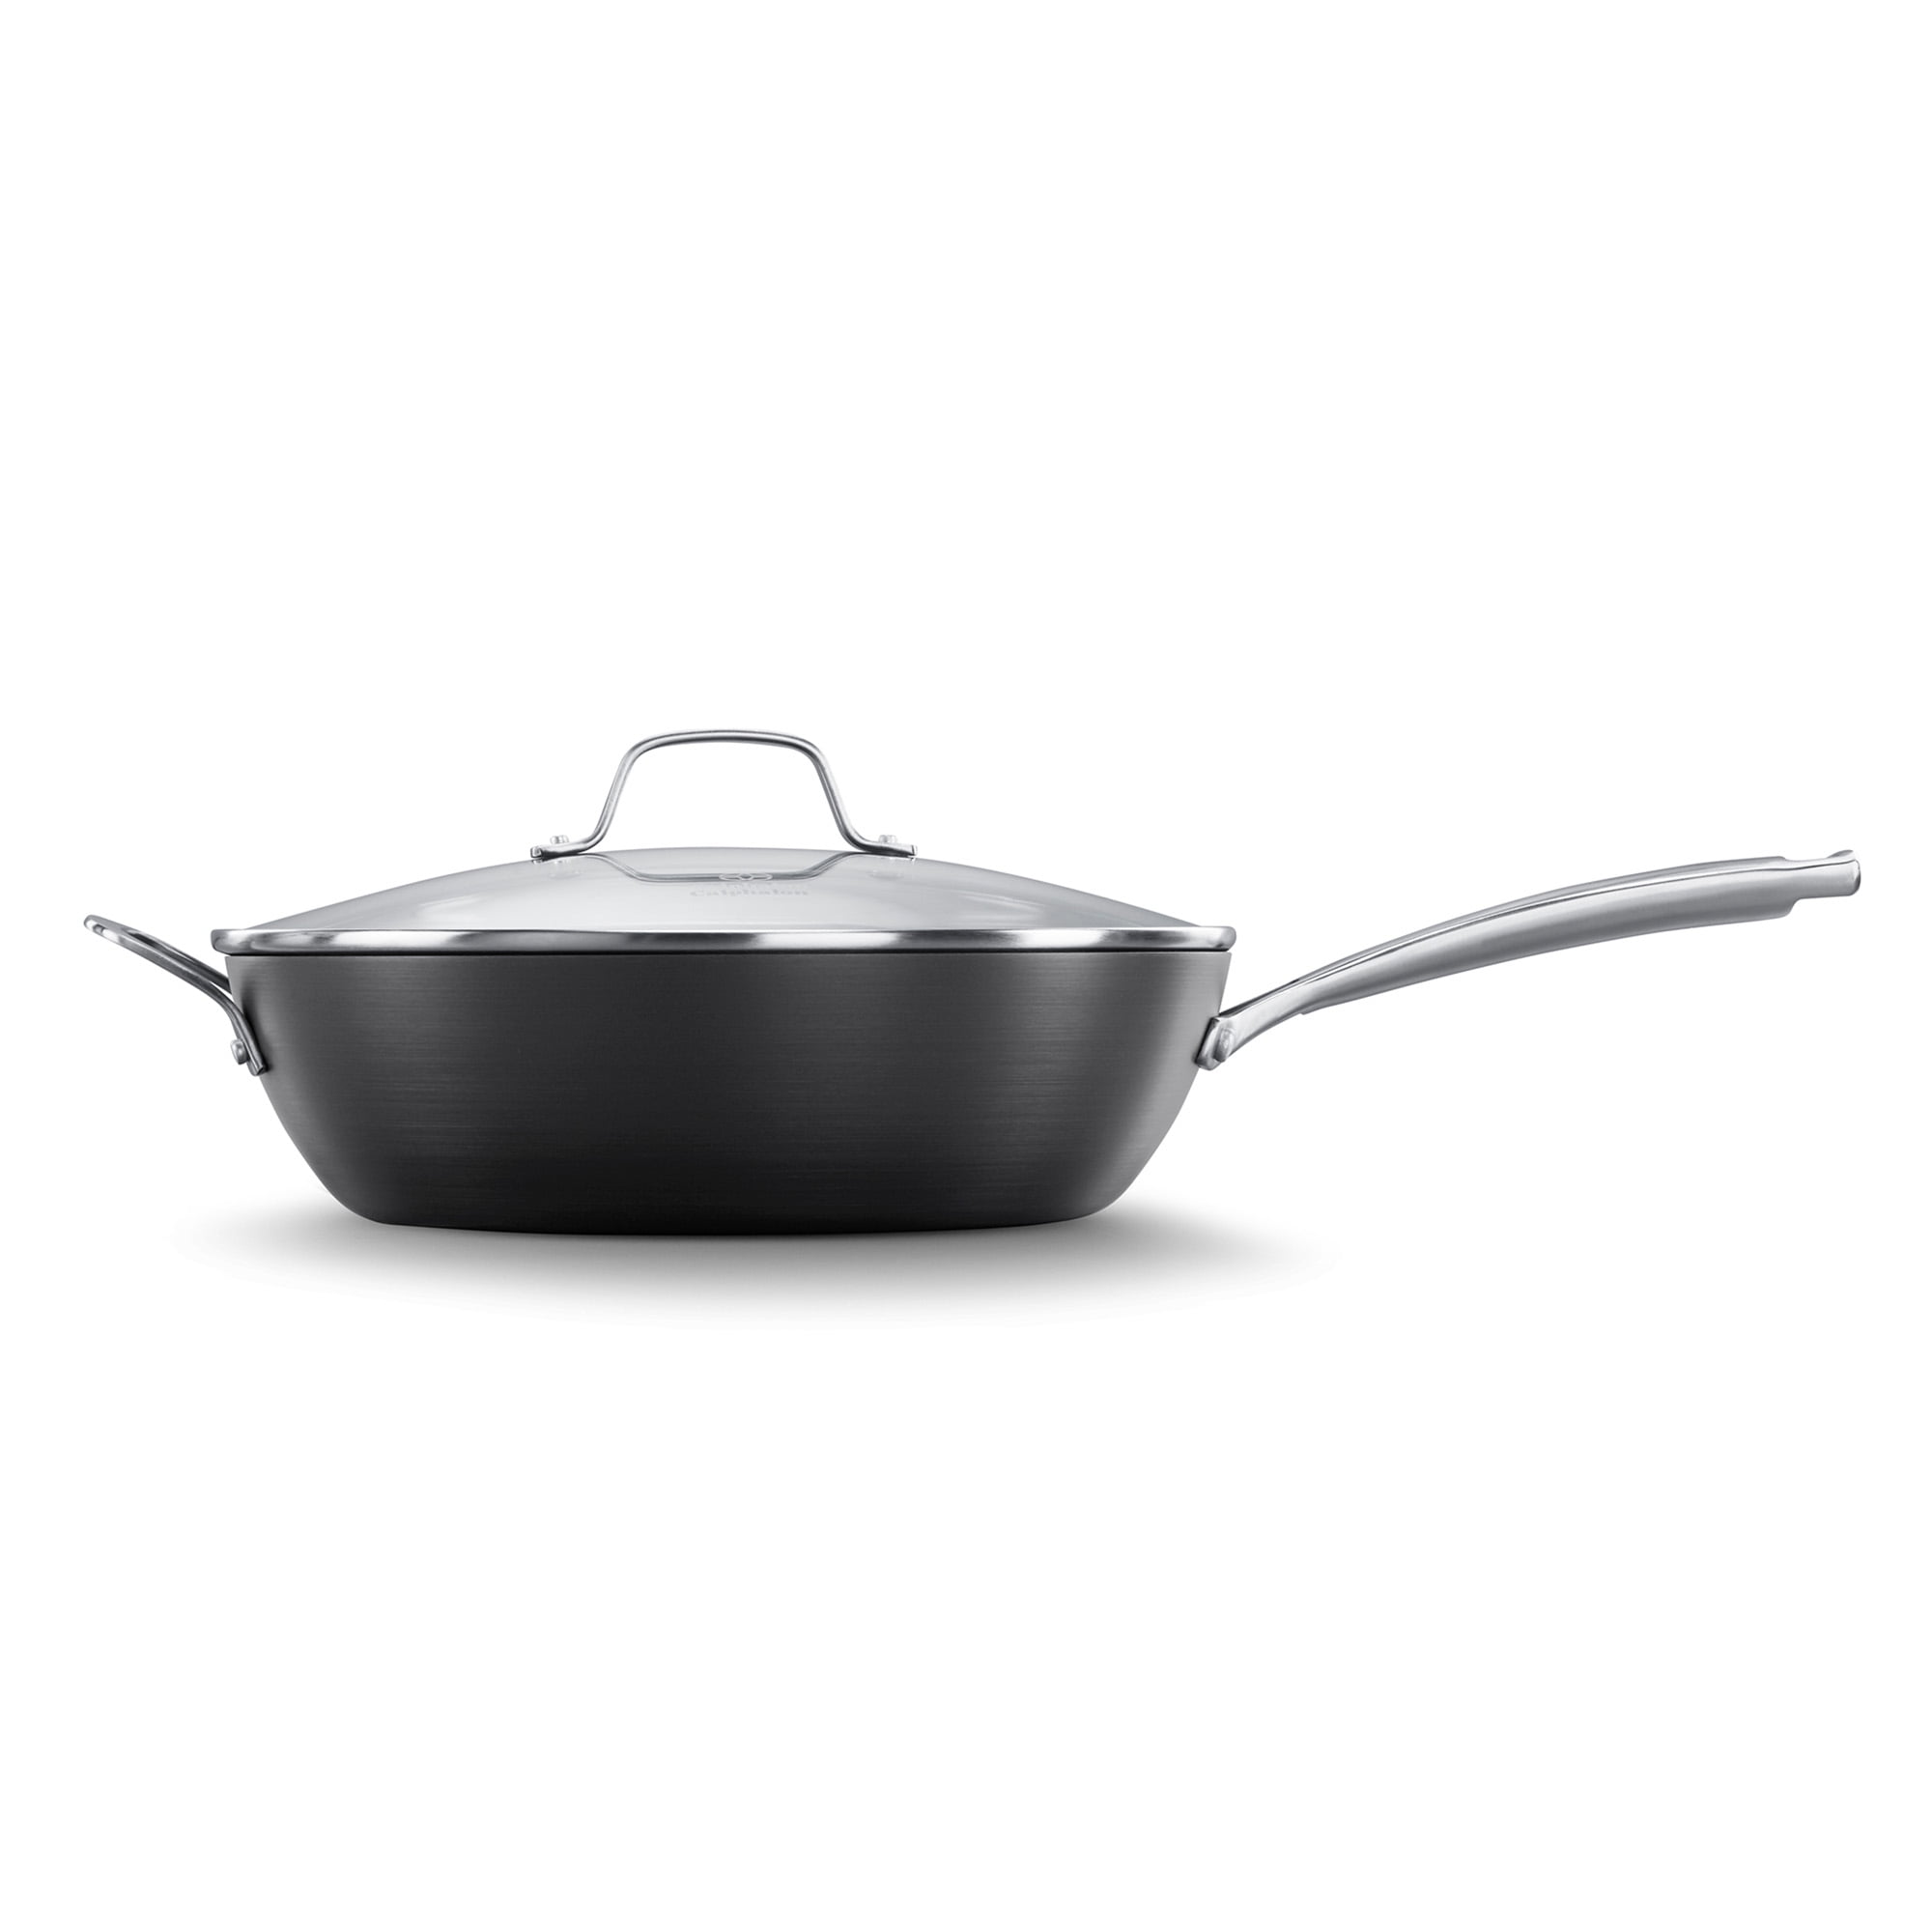 Make kitchen cleanup a breeze w/ this Calphalon Nonstick 12-inch Pan for $24